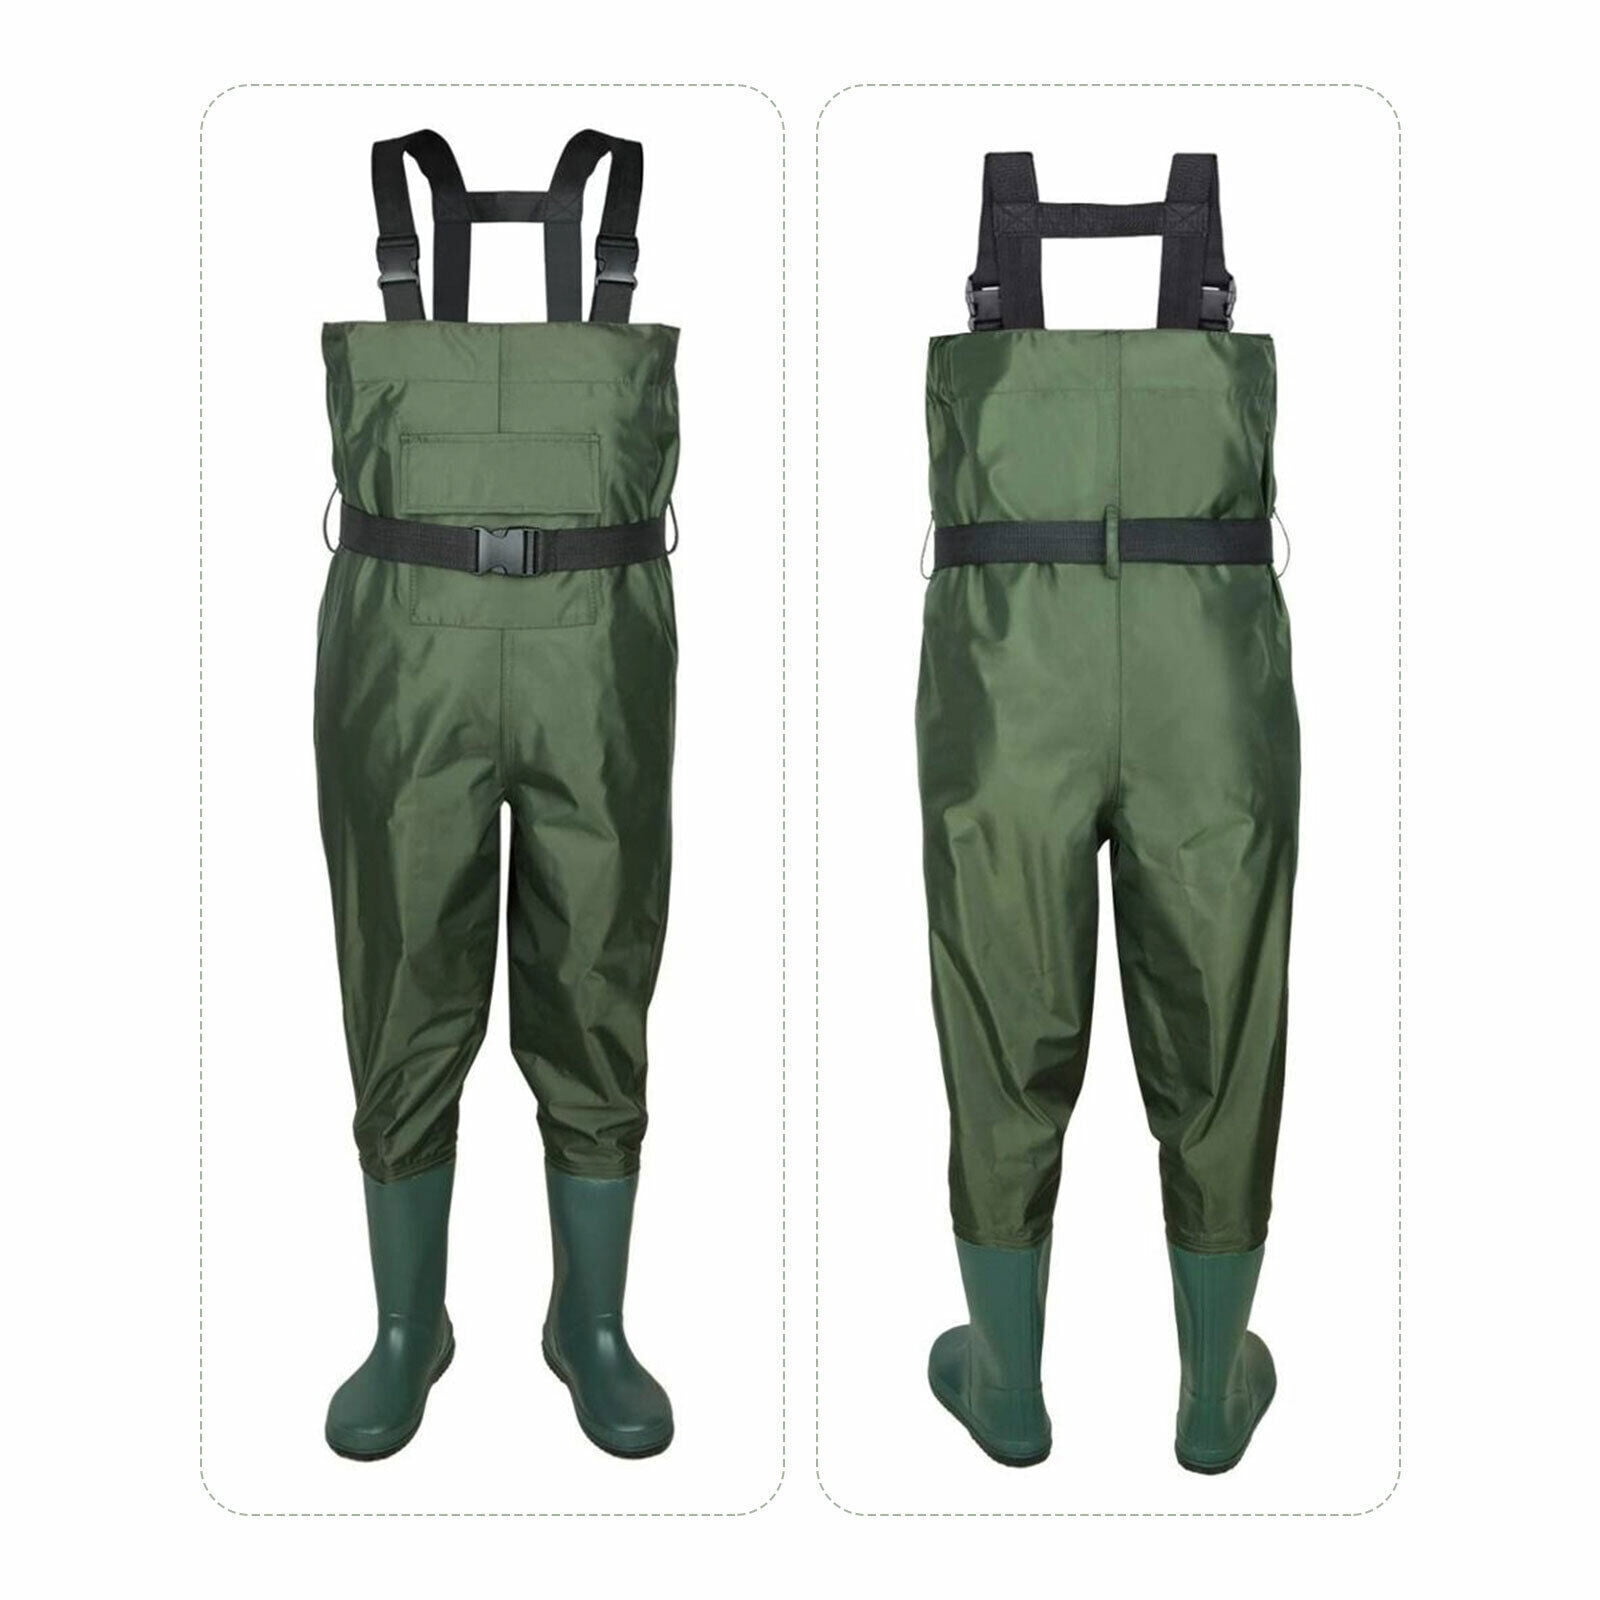 Fishing Hip Waders, Water Resistant Wading Hip Boots, Nylon Wading